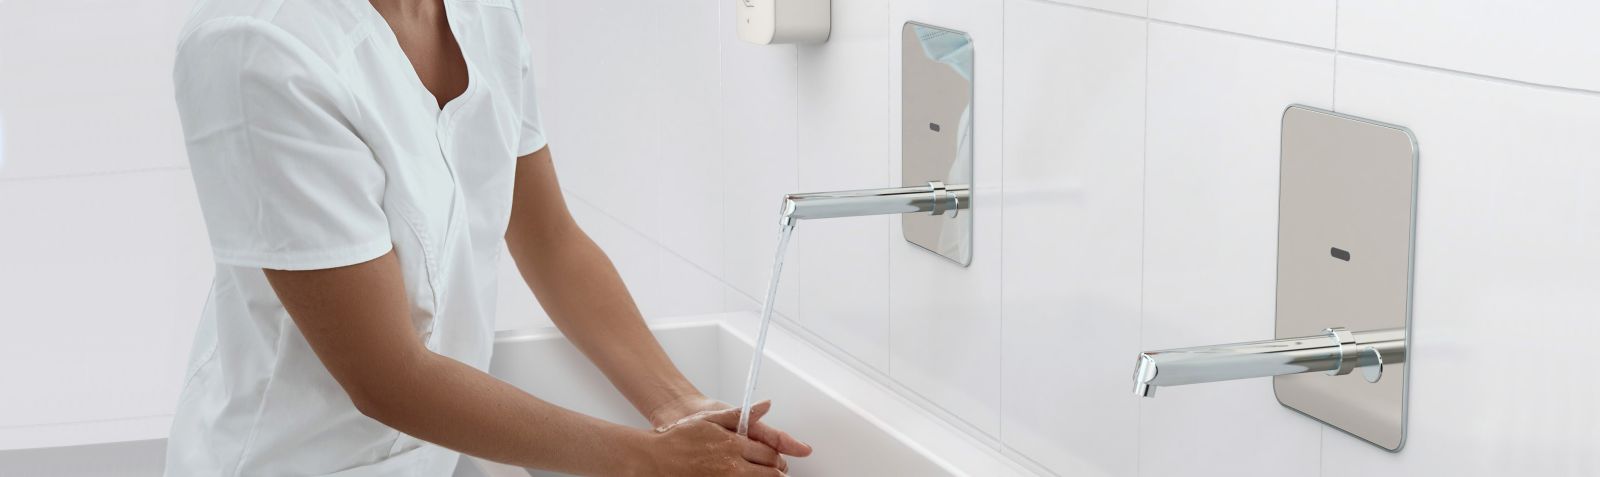 Header Image of a nurse washing her hands in a hospital with Galvin Engineering's new CMV2 tapware.